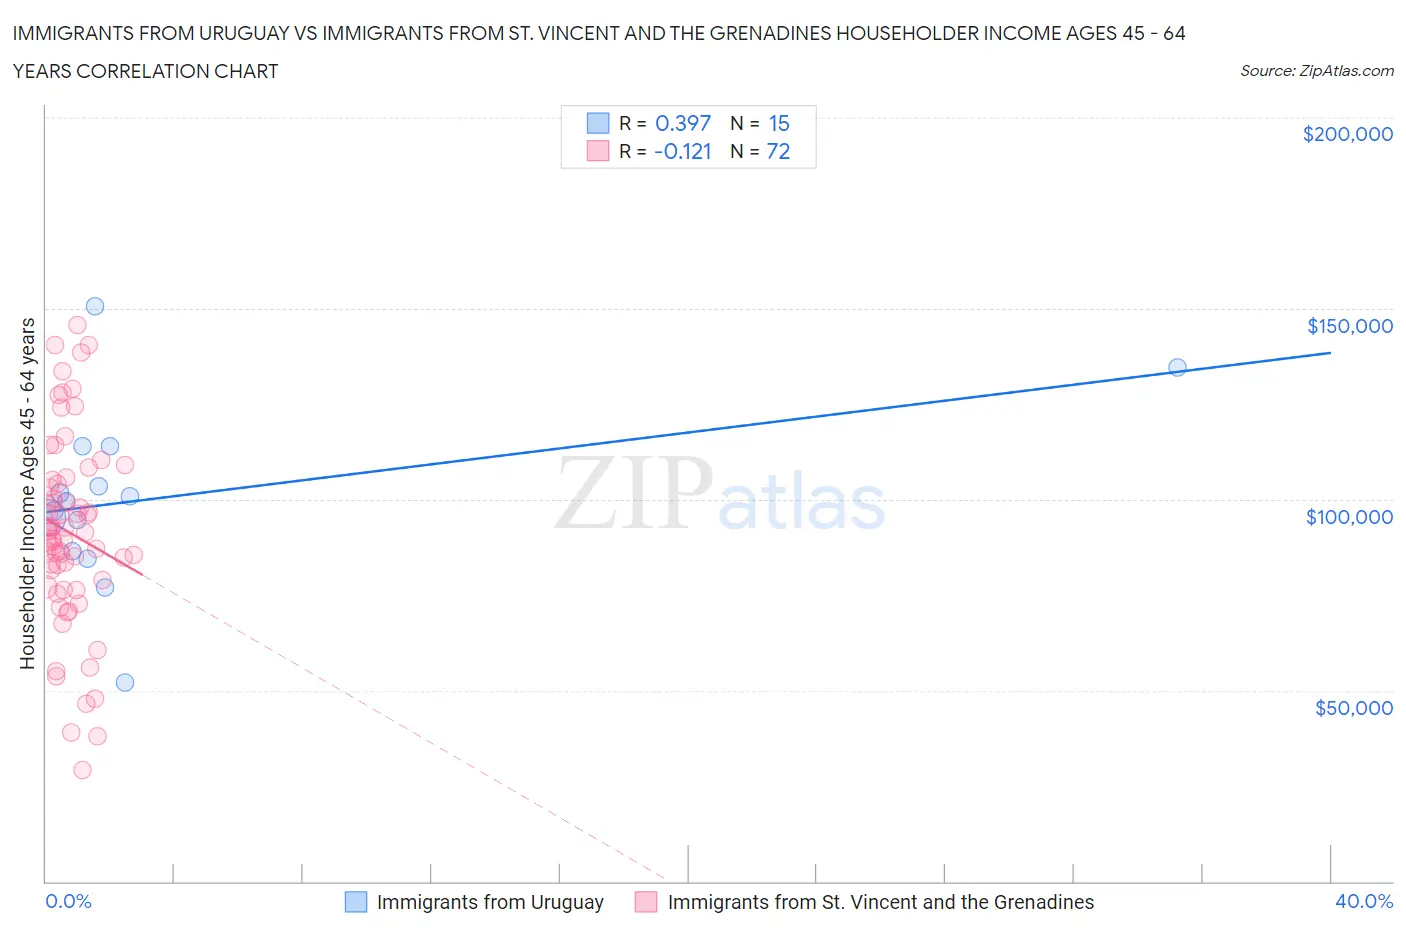 Immigrants from Uruguay vs Immigrants from St. Vincent and the Grenadines Householder Income Ages 45 - 64 years